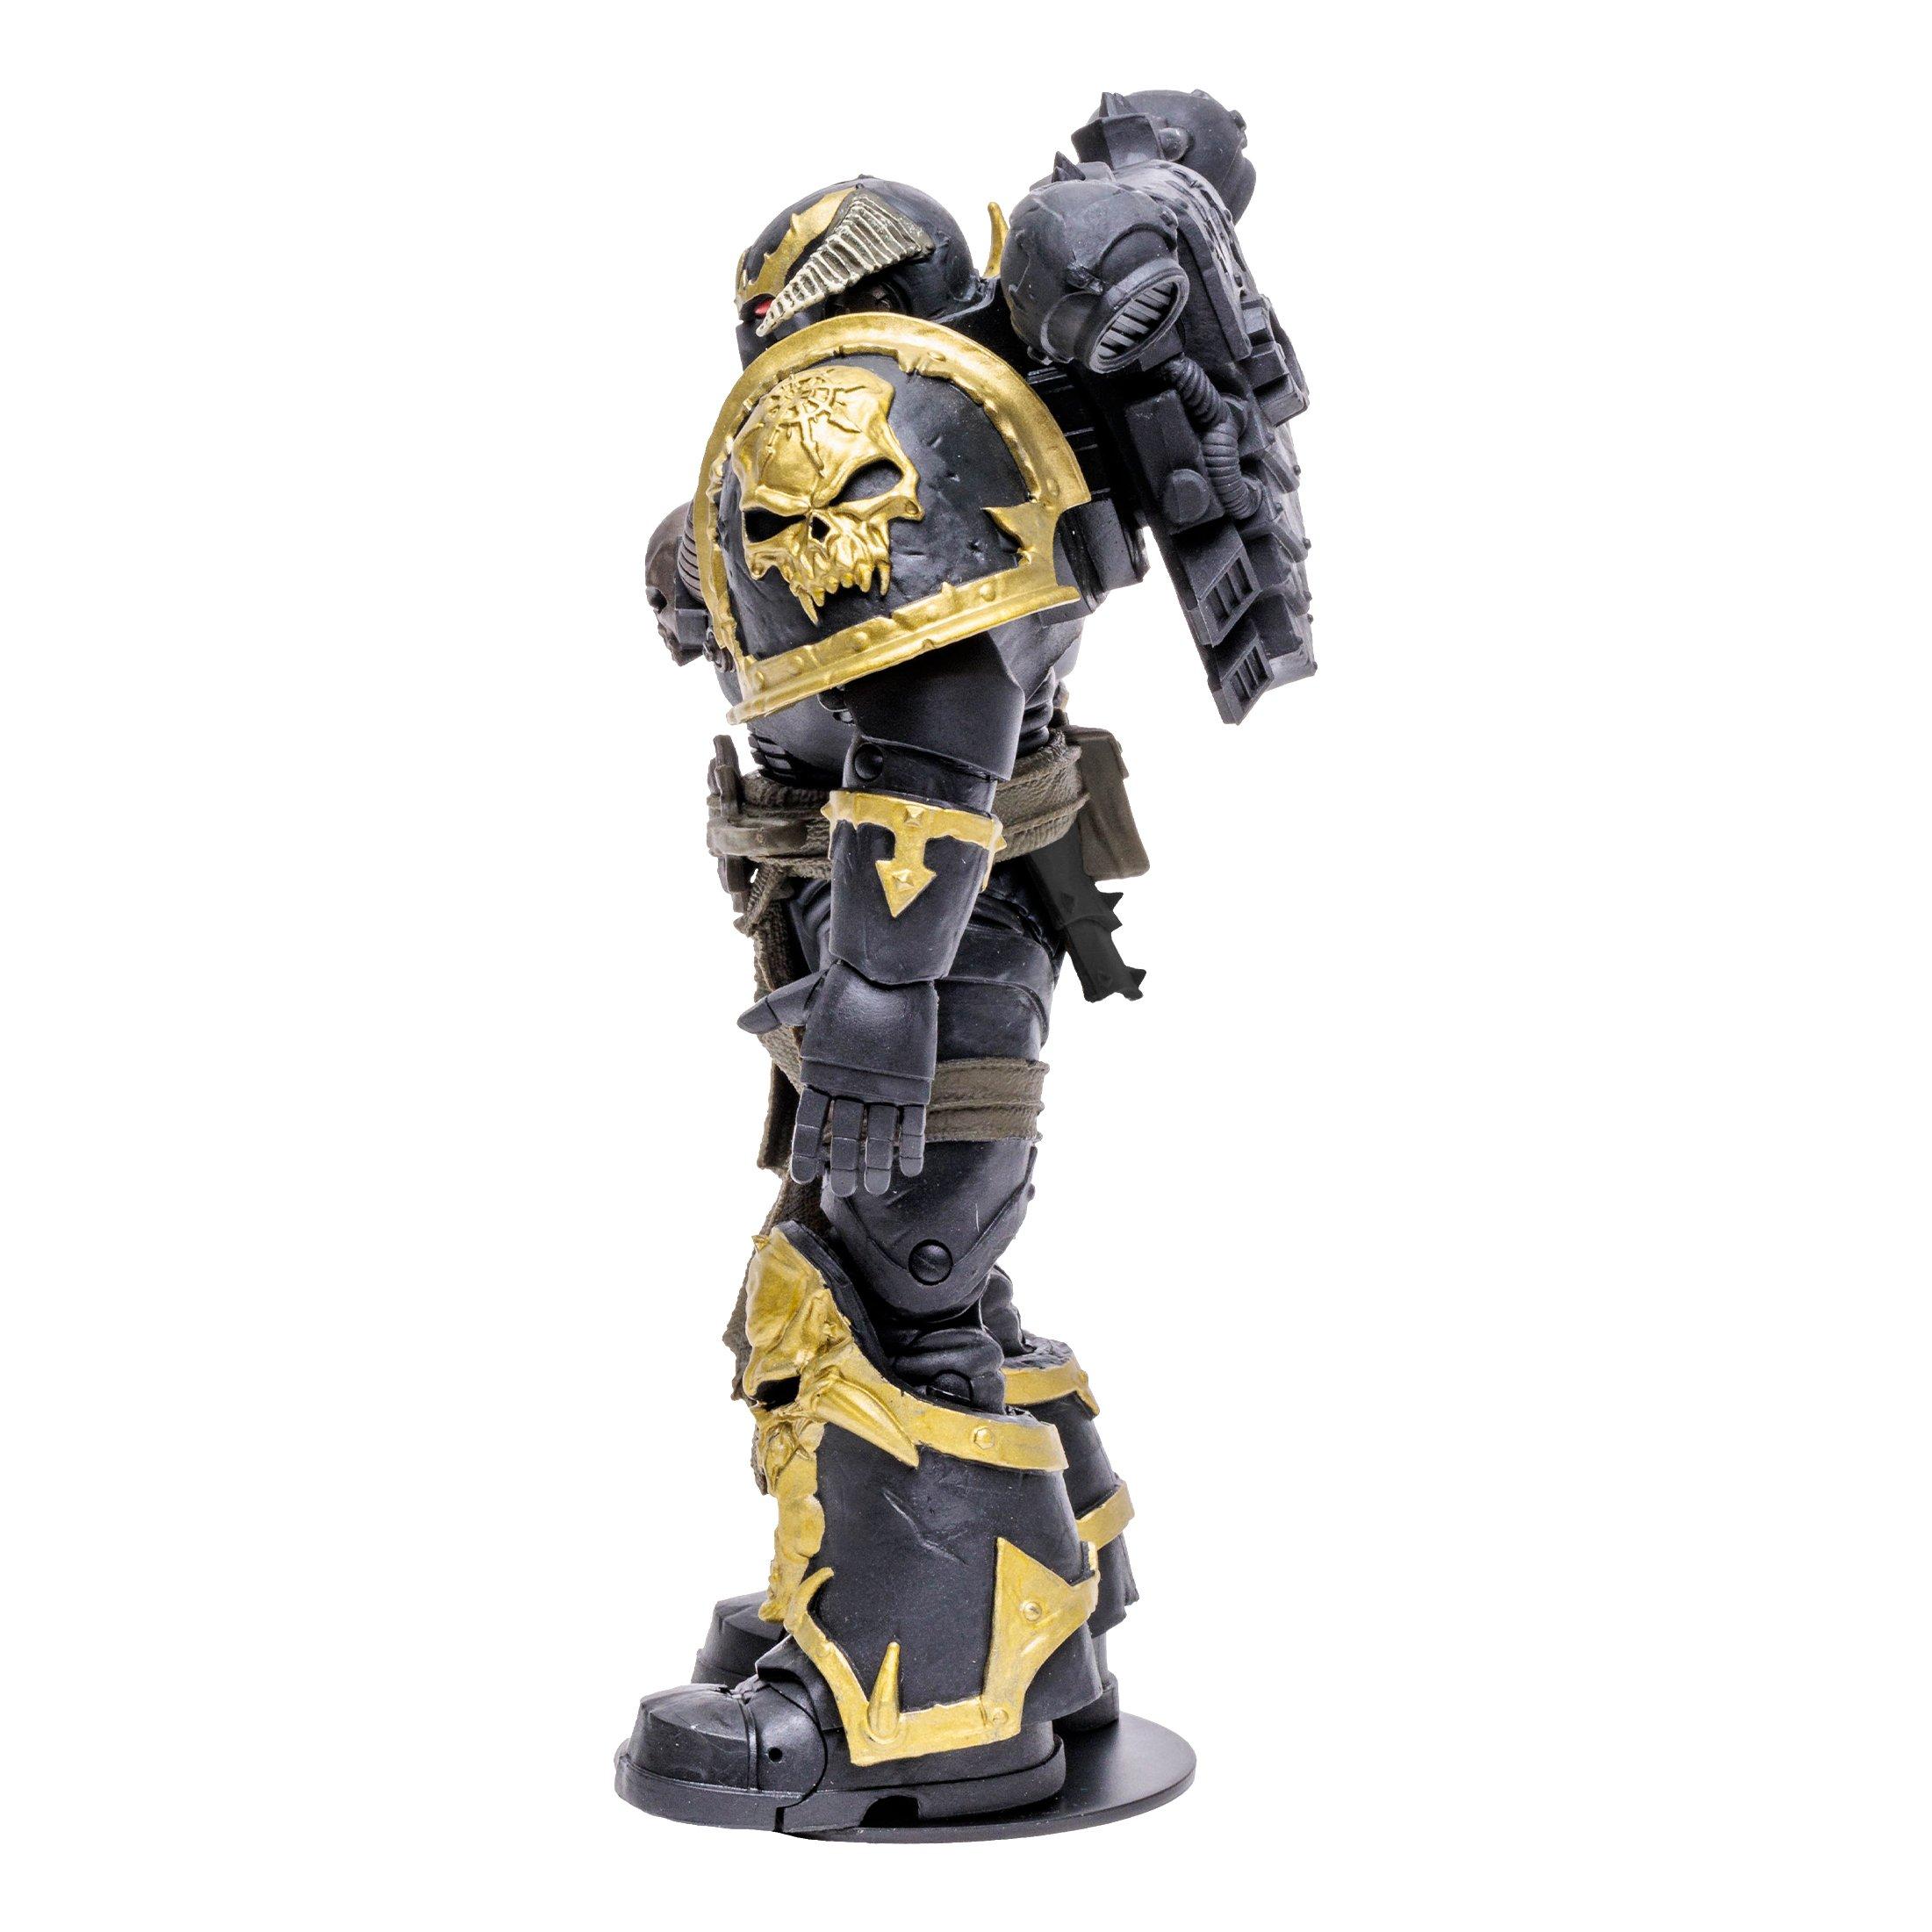 list item 3 of 10 McFarlane Toys Warhammer 40,000 Chaos Space Marine 7-in Scale Action Figure